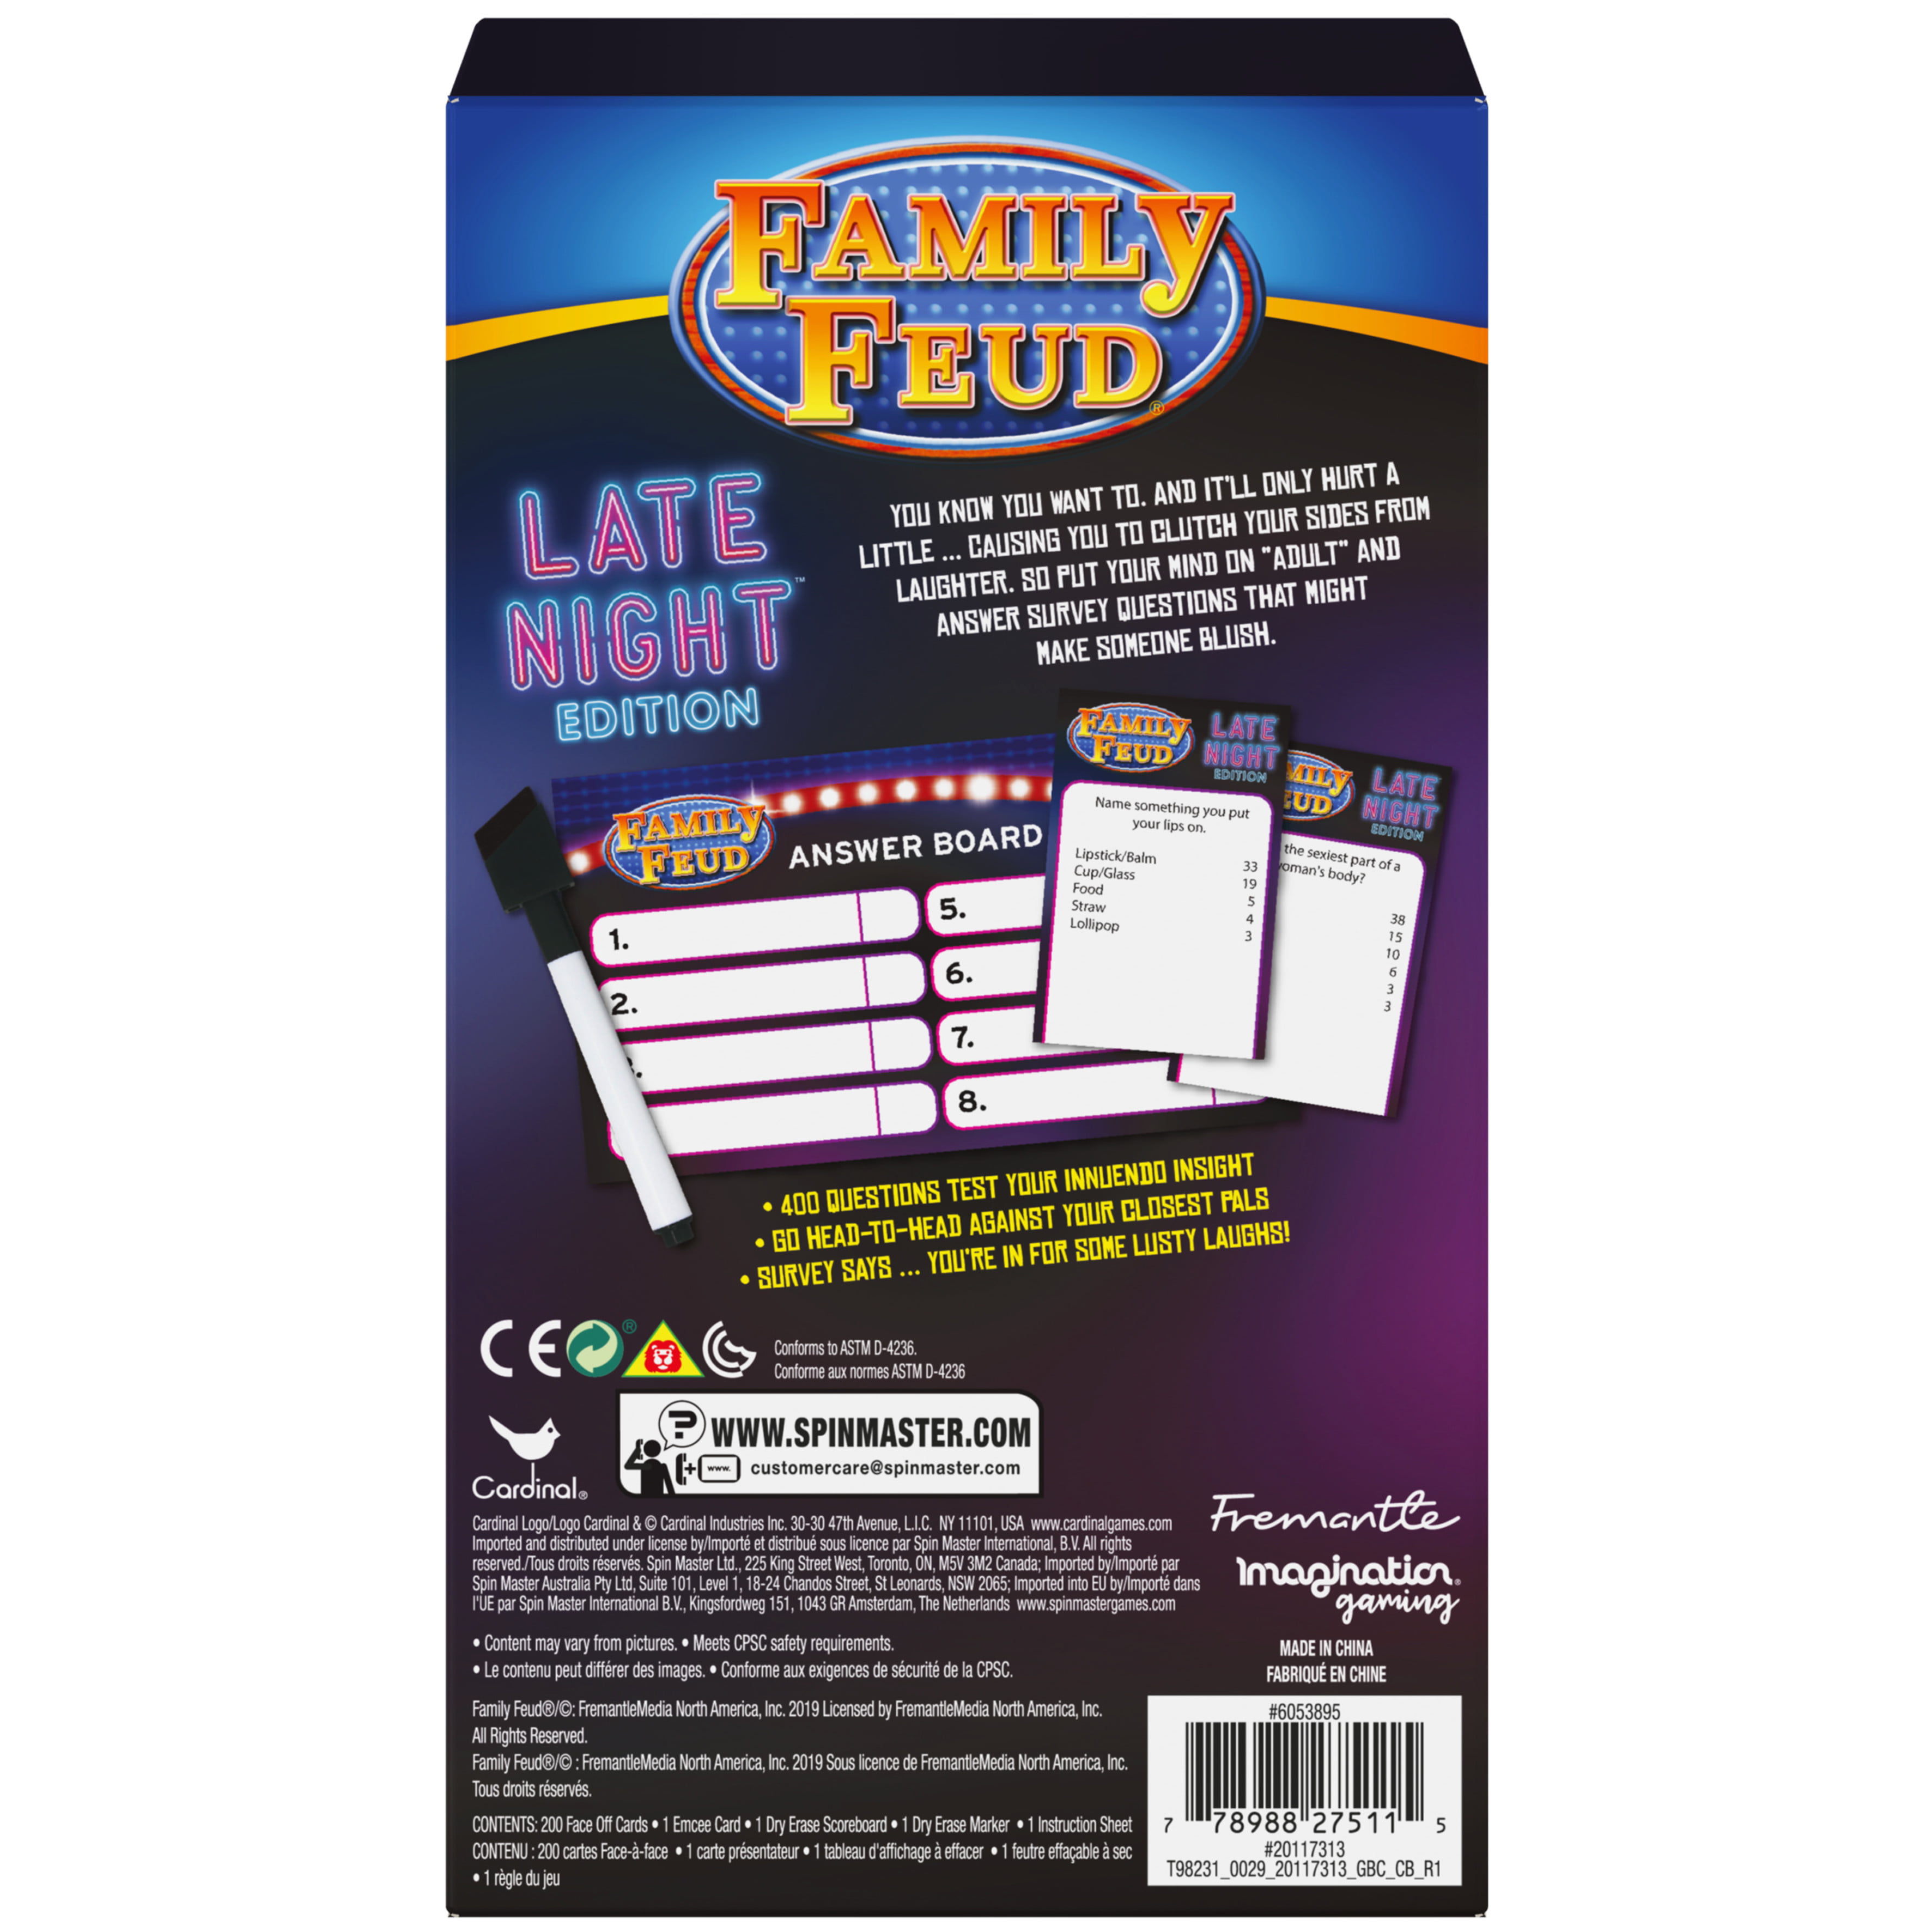 Family Feud Game The Late Late Night Edition : Target